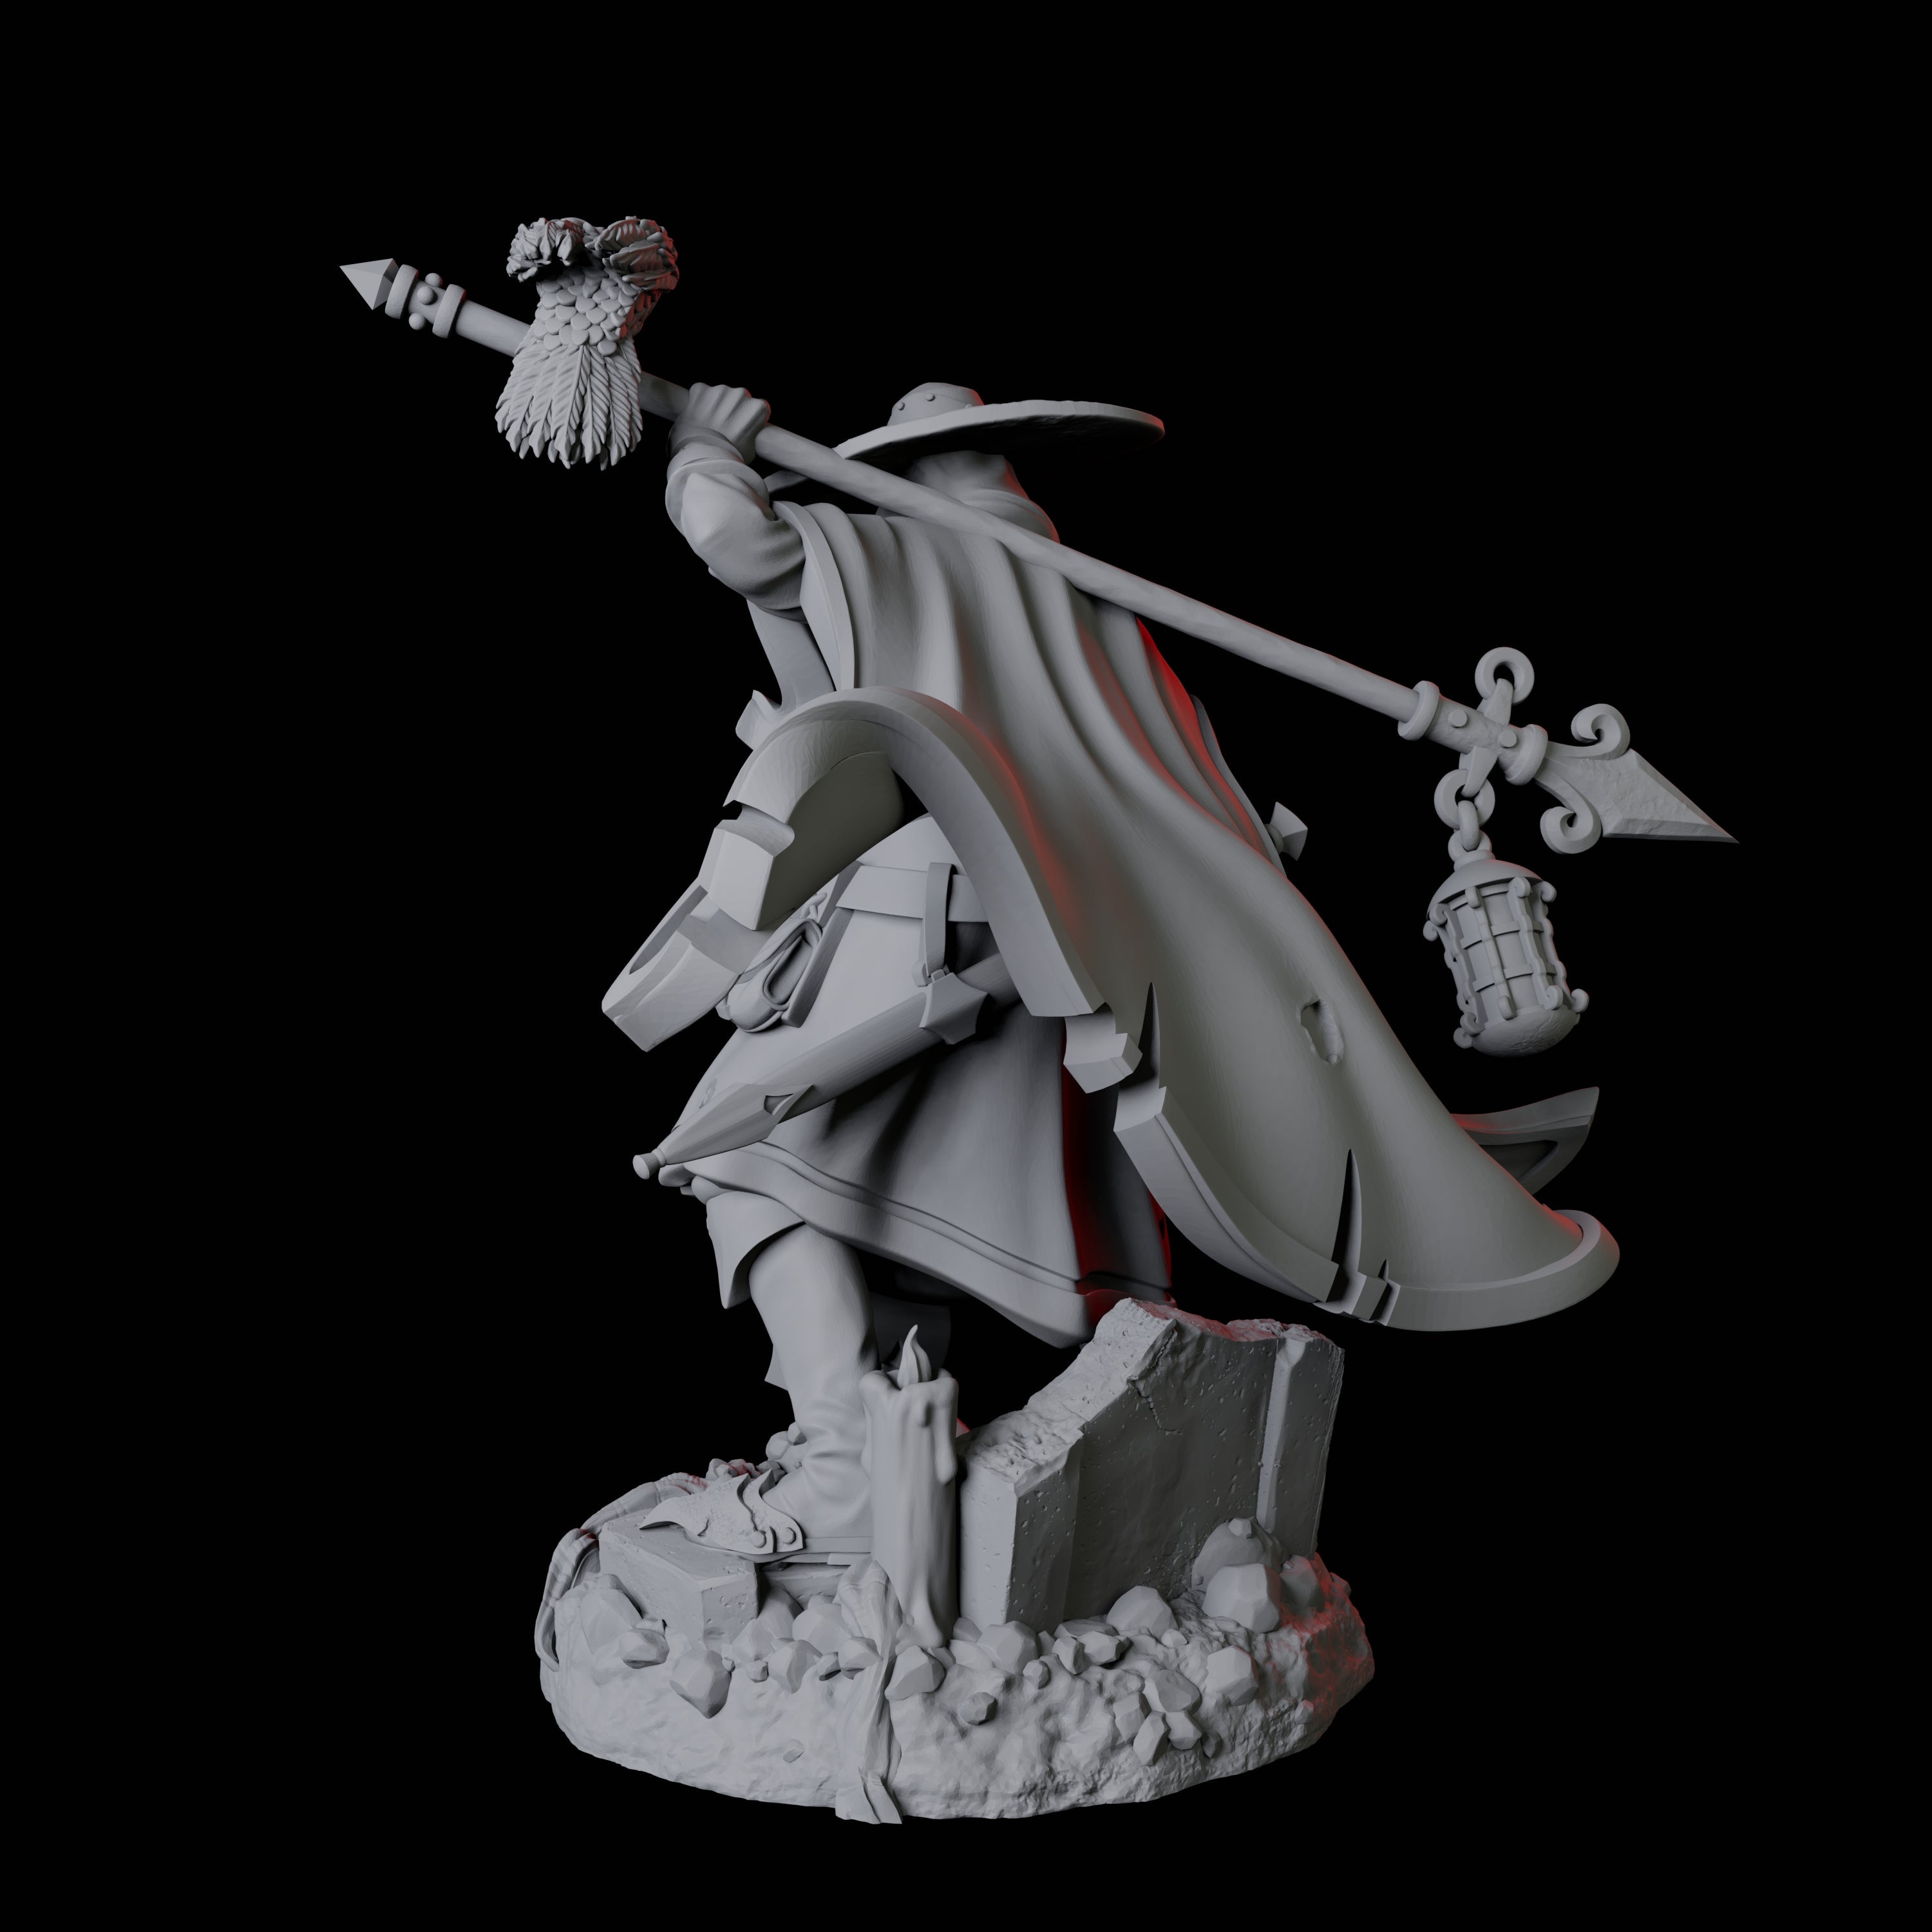 Creepy Gravedigger A Miniature for Dungeons and Dragons, Pathfinder or other TTRPGs